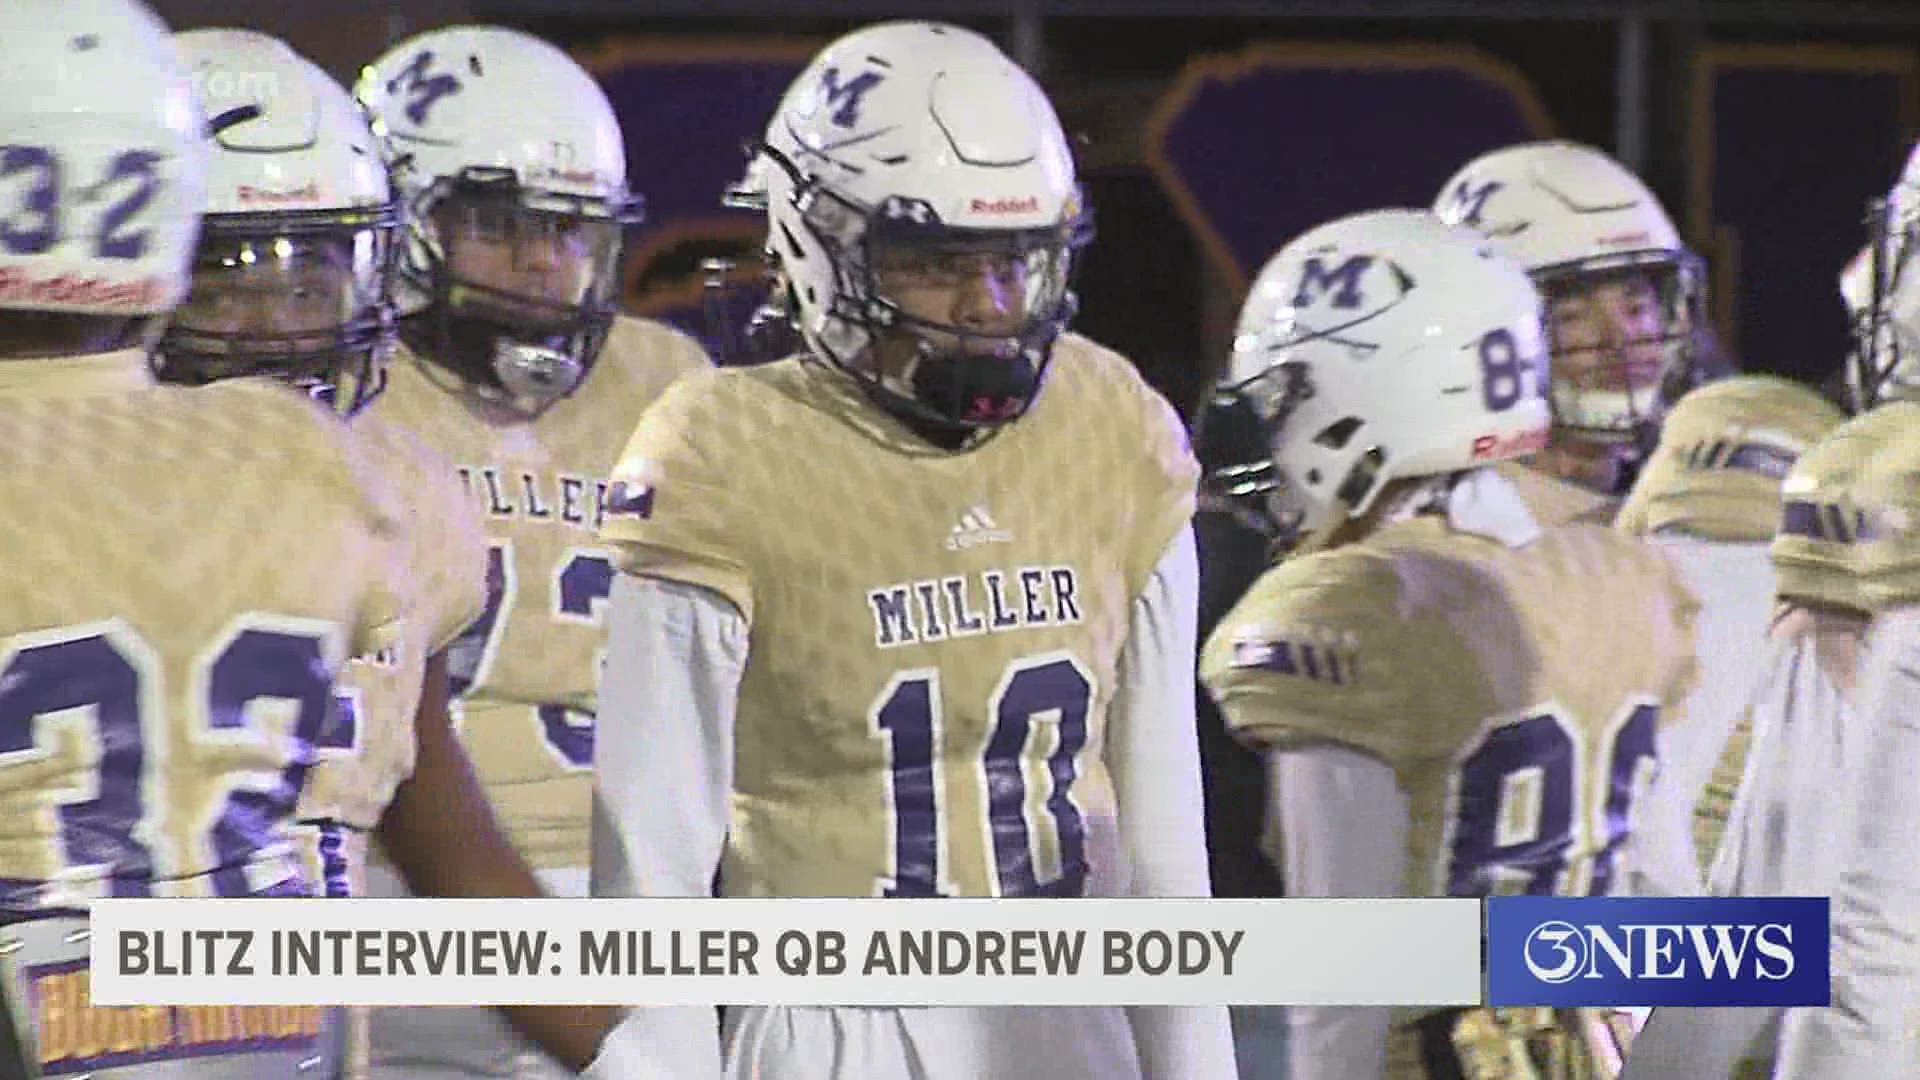 Blitz profile with Miller QB Andrew Body, Thurs. recap and COVID changes, Play of the Week and Next Week on the Blitz.